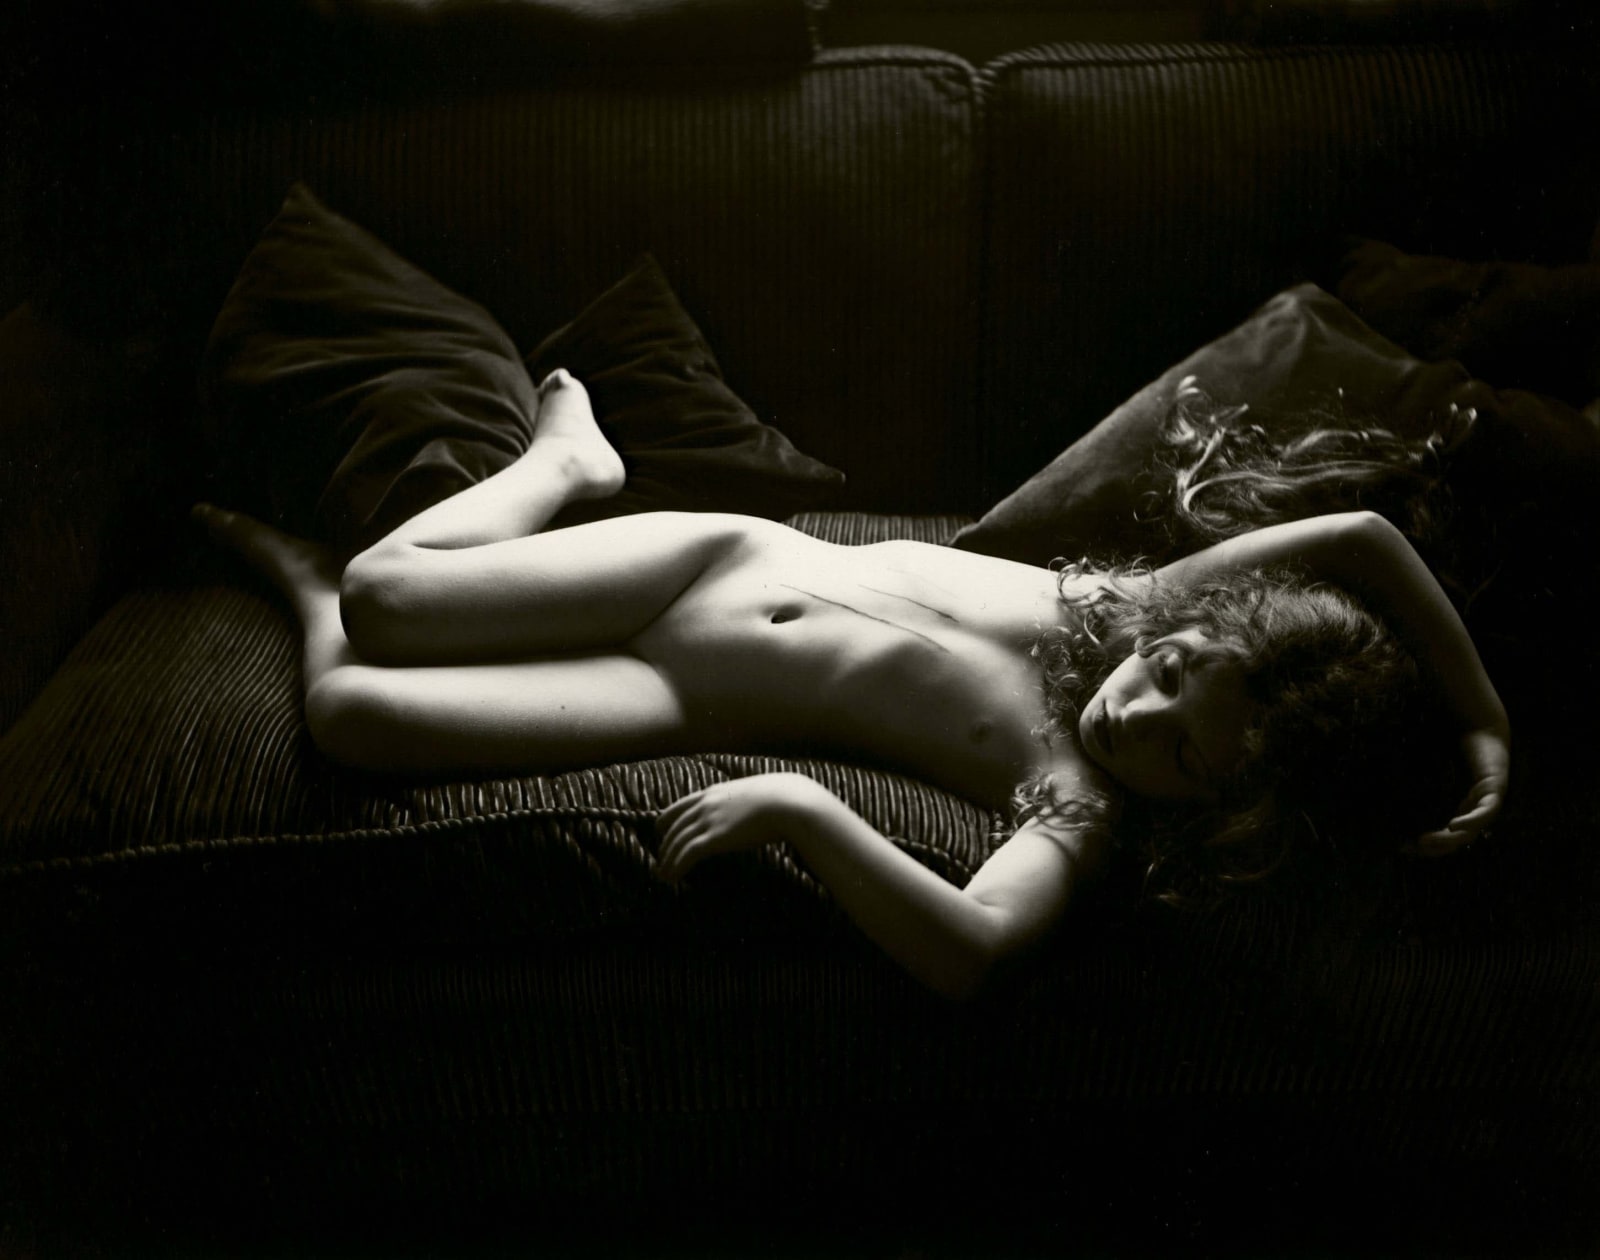 Virginia lying on couch with dog scratches on torso, from the Immediate Family series, by Sally Mann